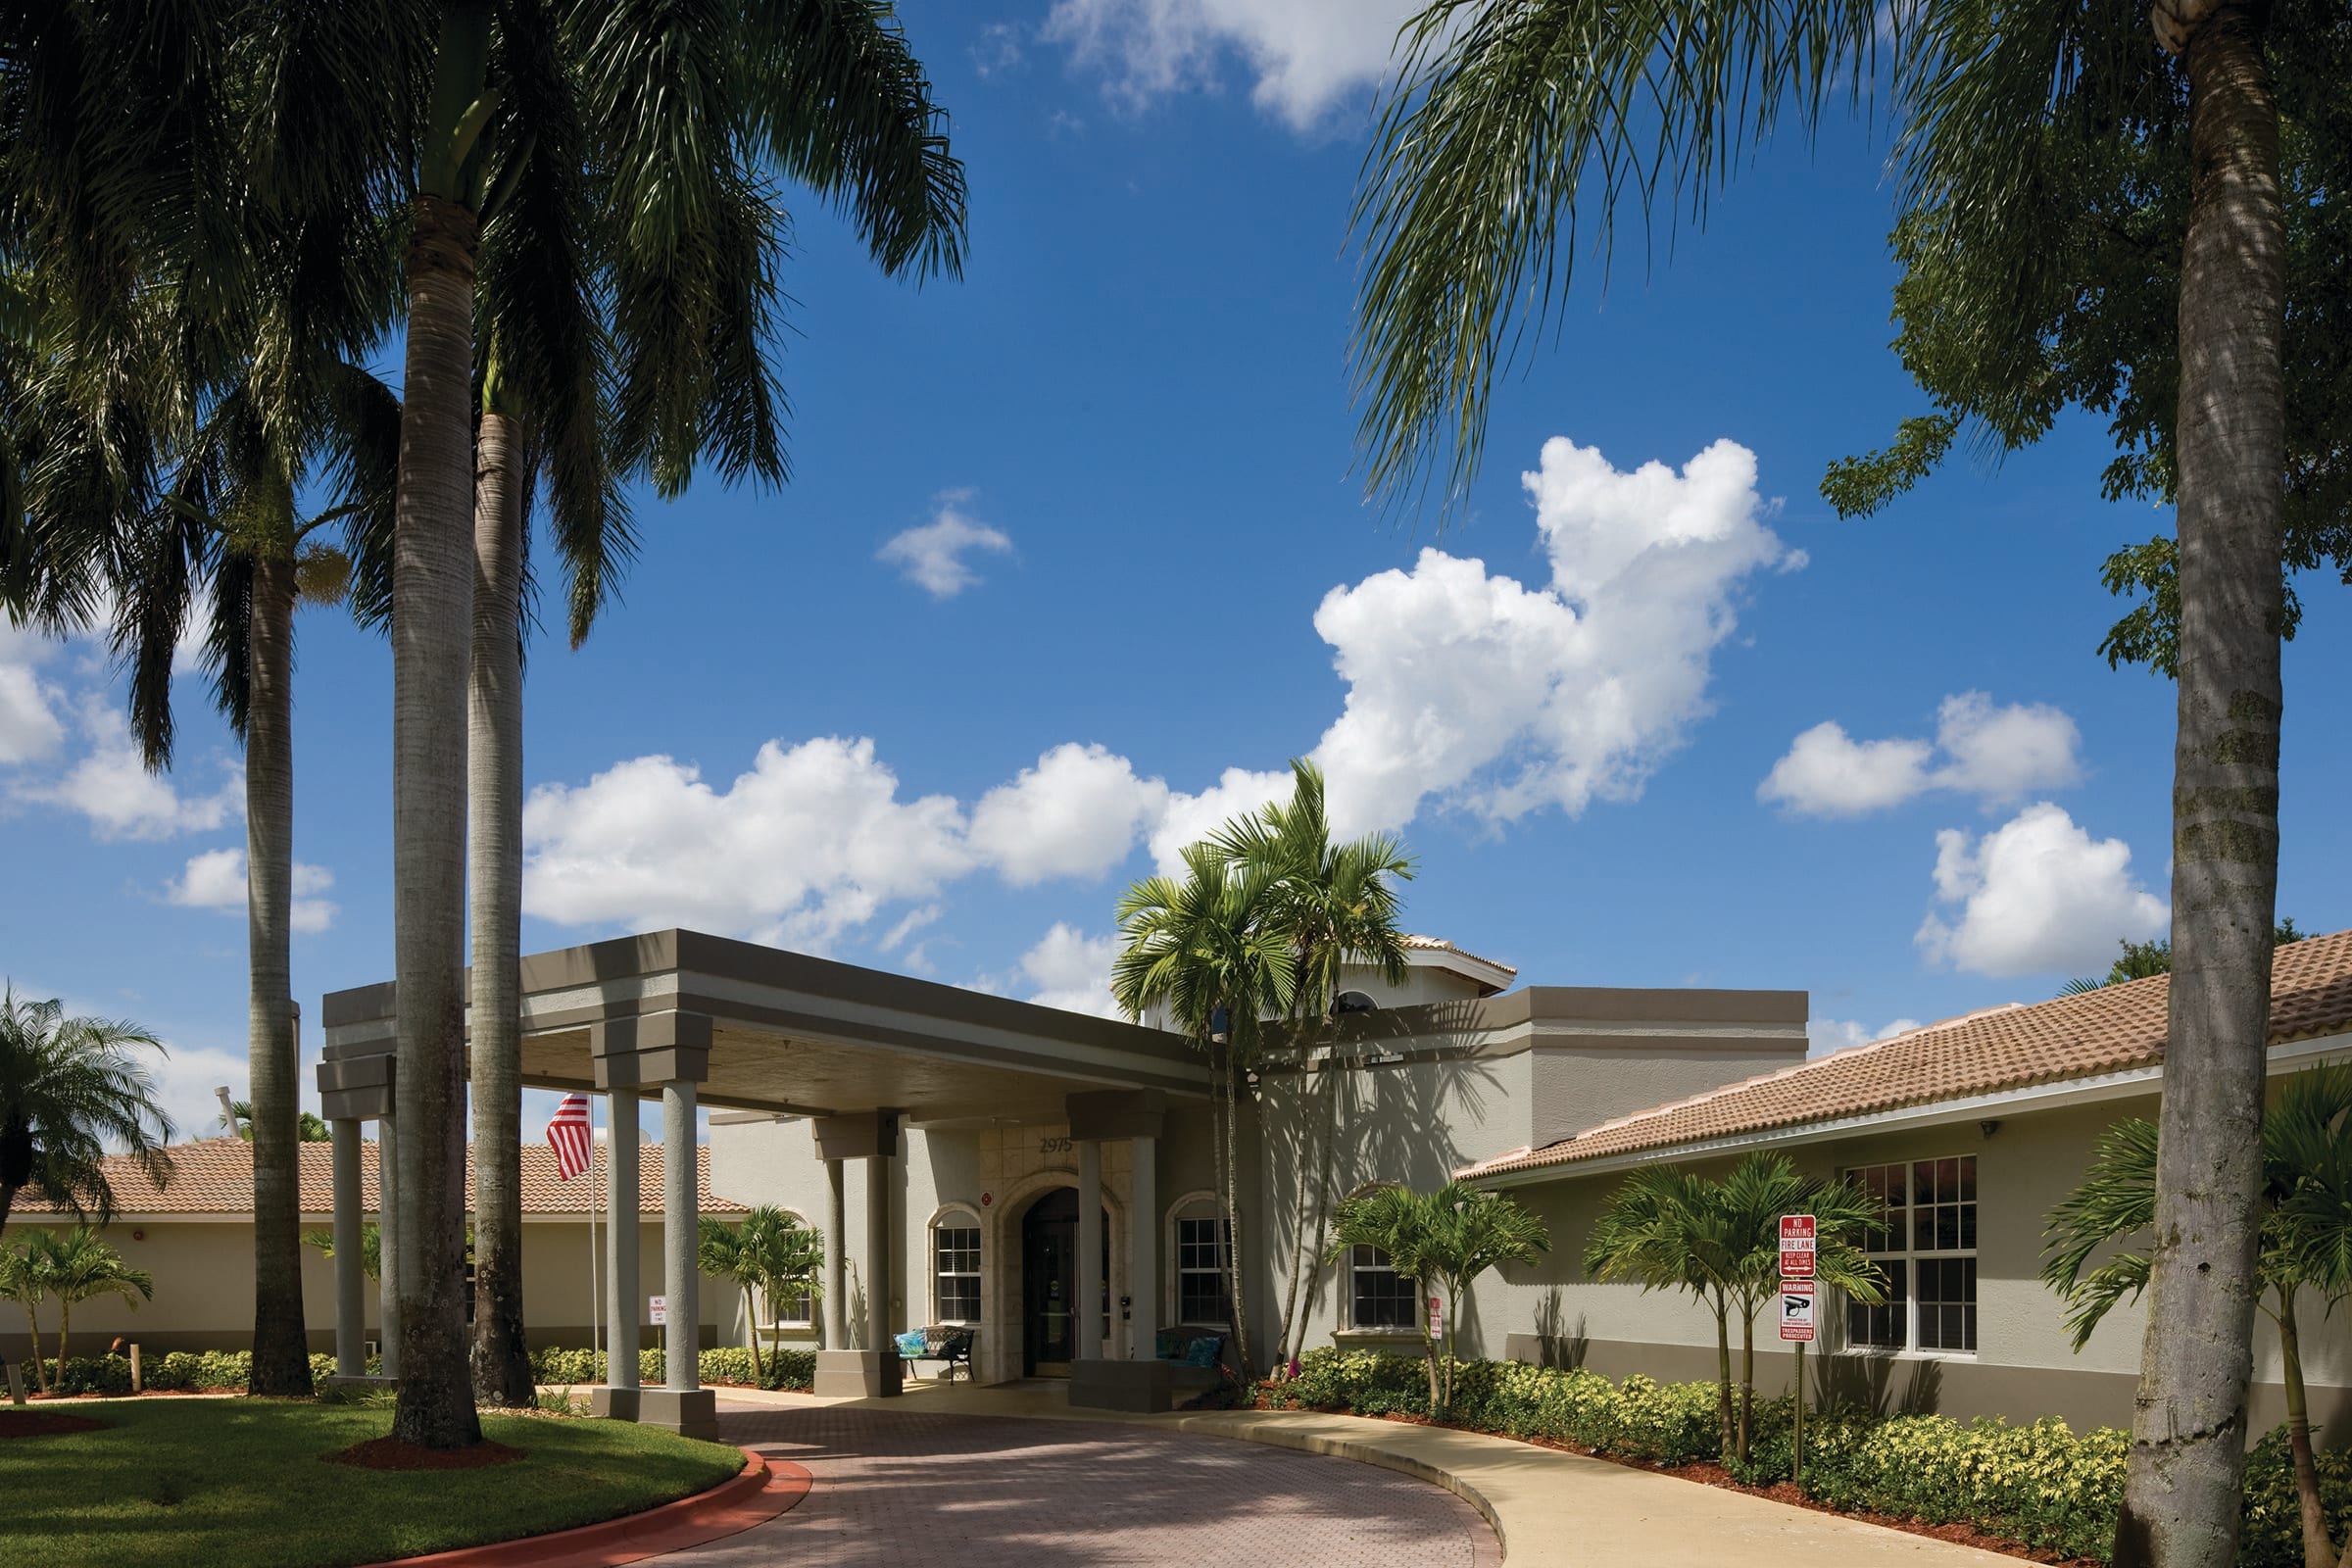 HarborChase of Coral Springs community entrance